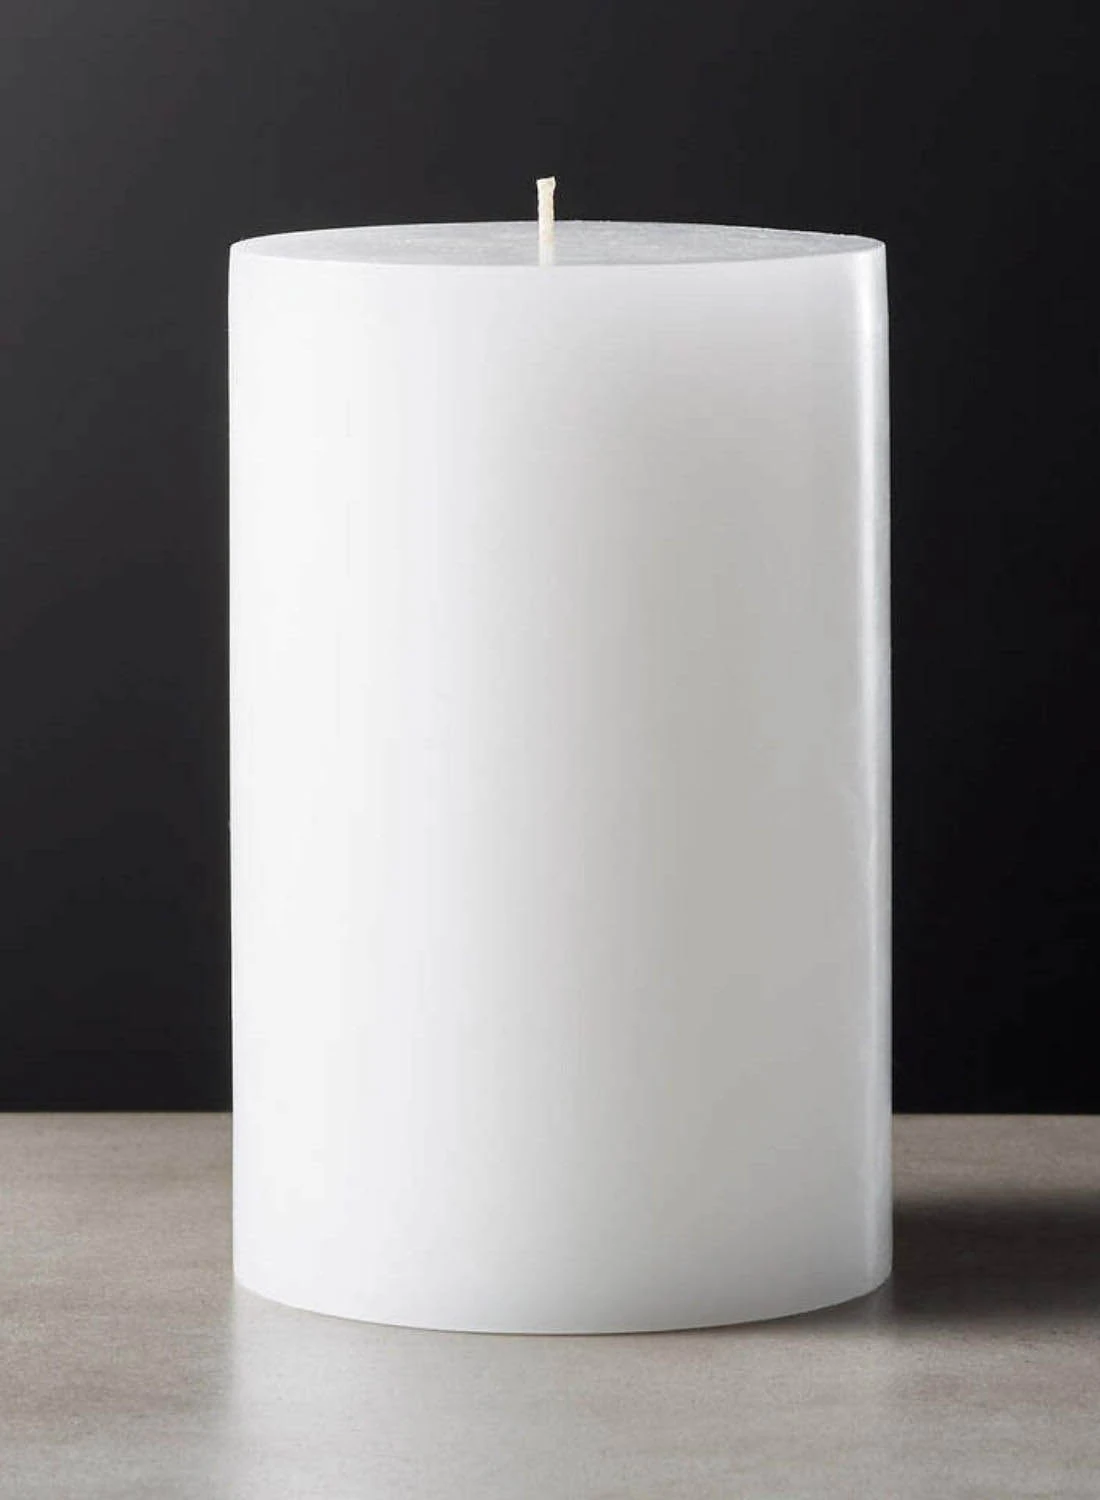 ebb & flow Pack of 4 Modern Unscented Wax Pillar Candle Unique Luxury Quality Product For The Perfect Stylish Home White 4 x 4.5inch